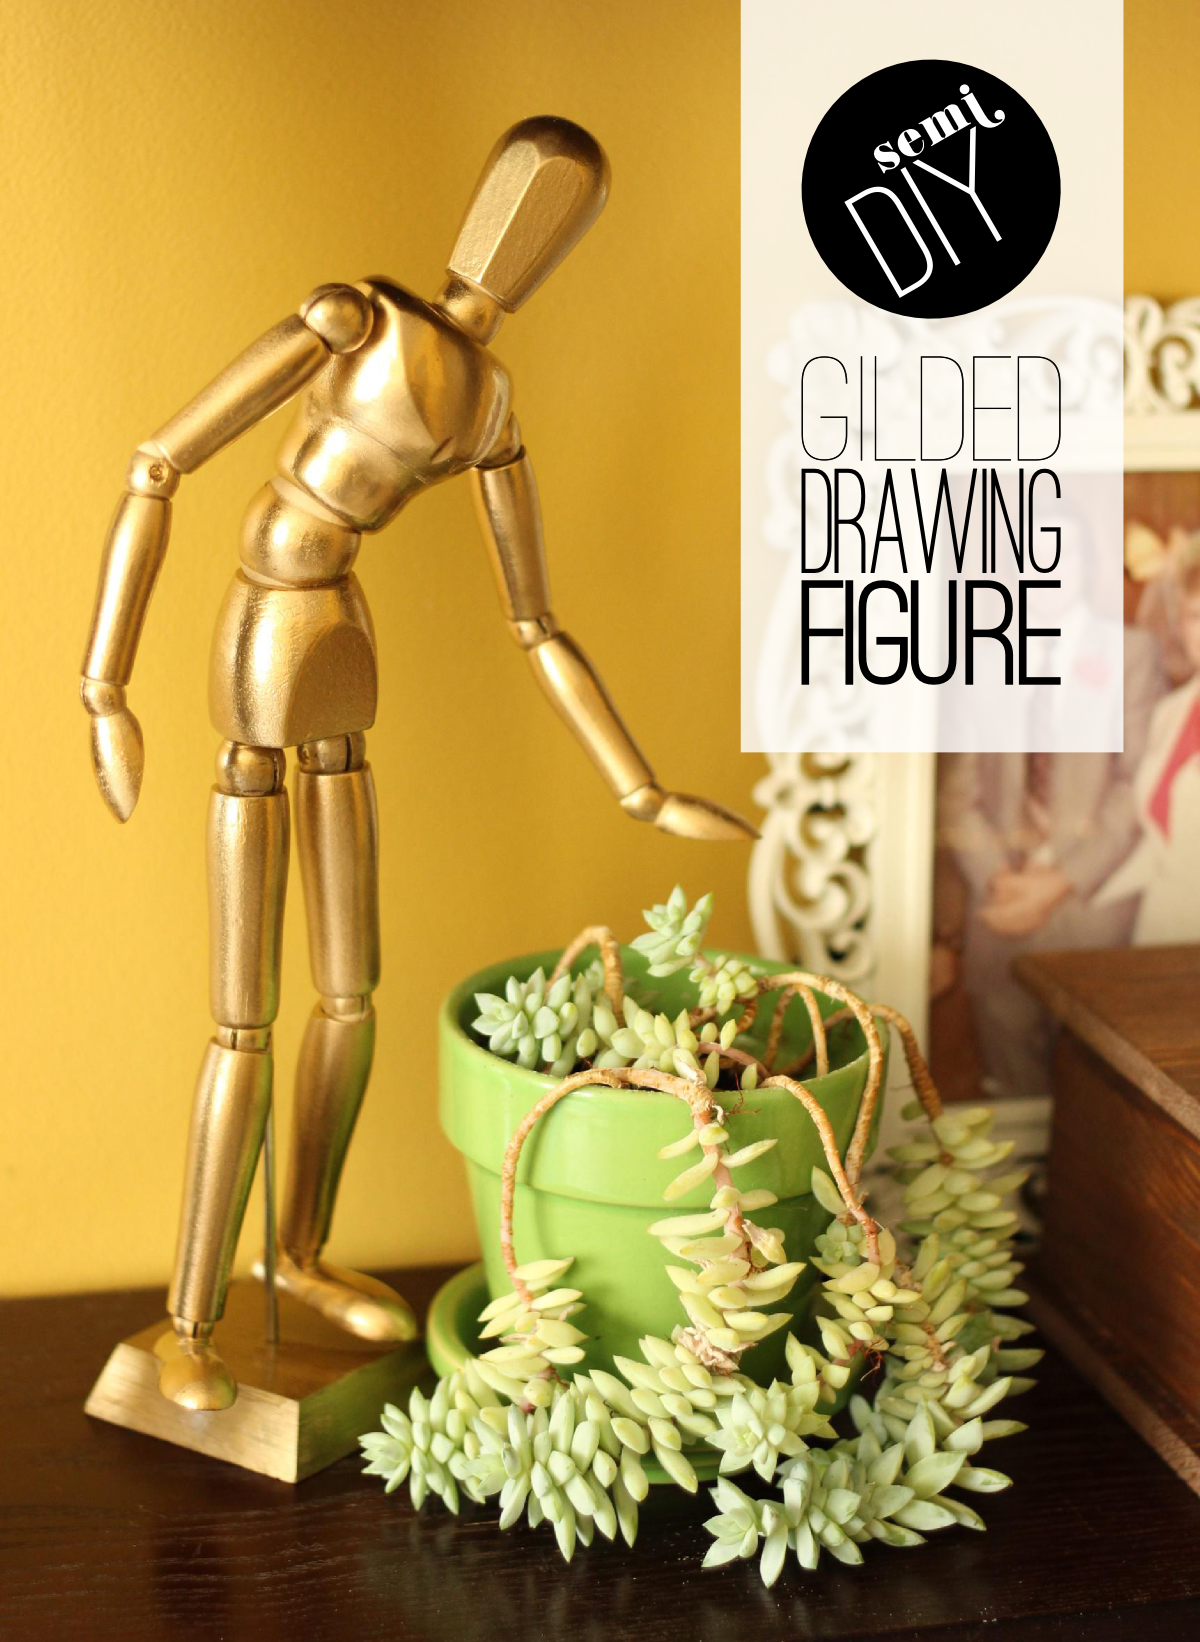 Fabric Paper Glue | DIY Gilded Drawing Figure